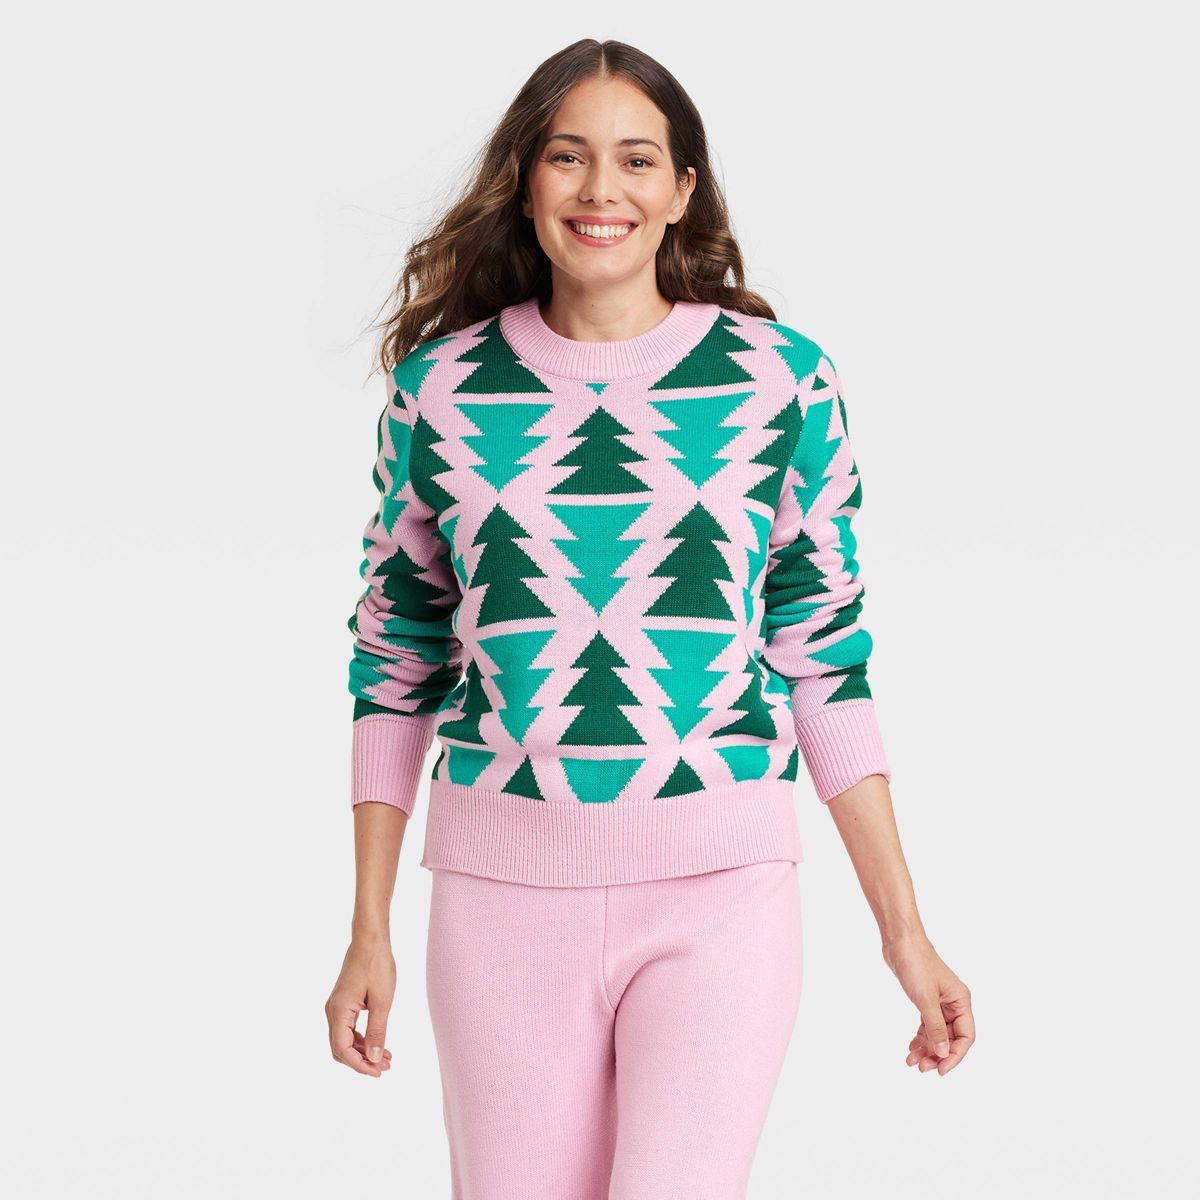 Women's Christmas Trees Graphic Sweater | Target